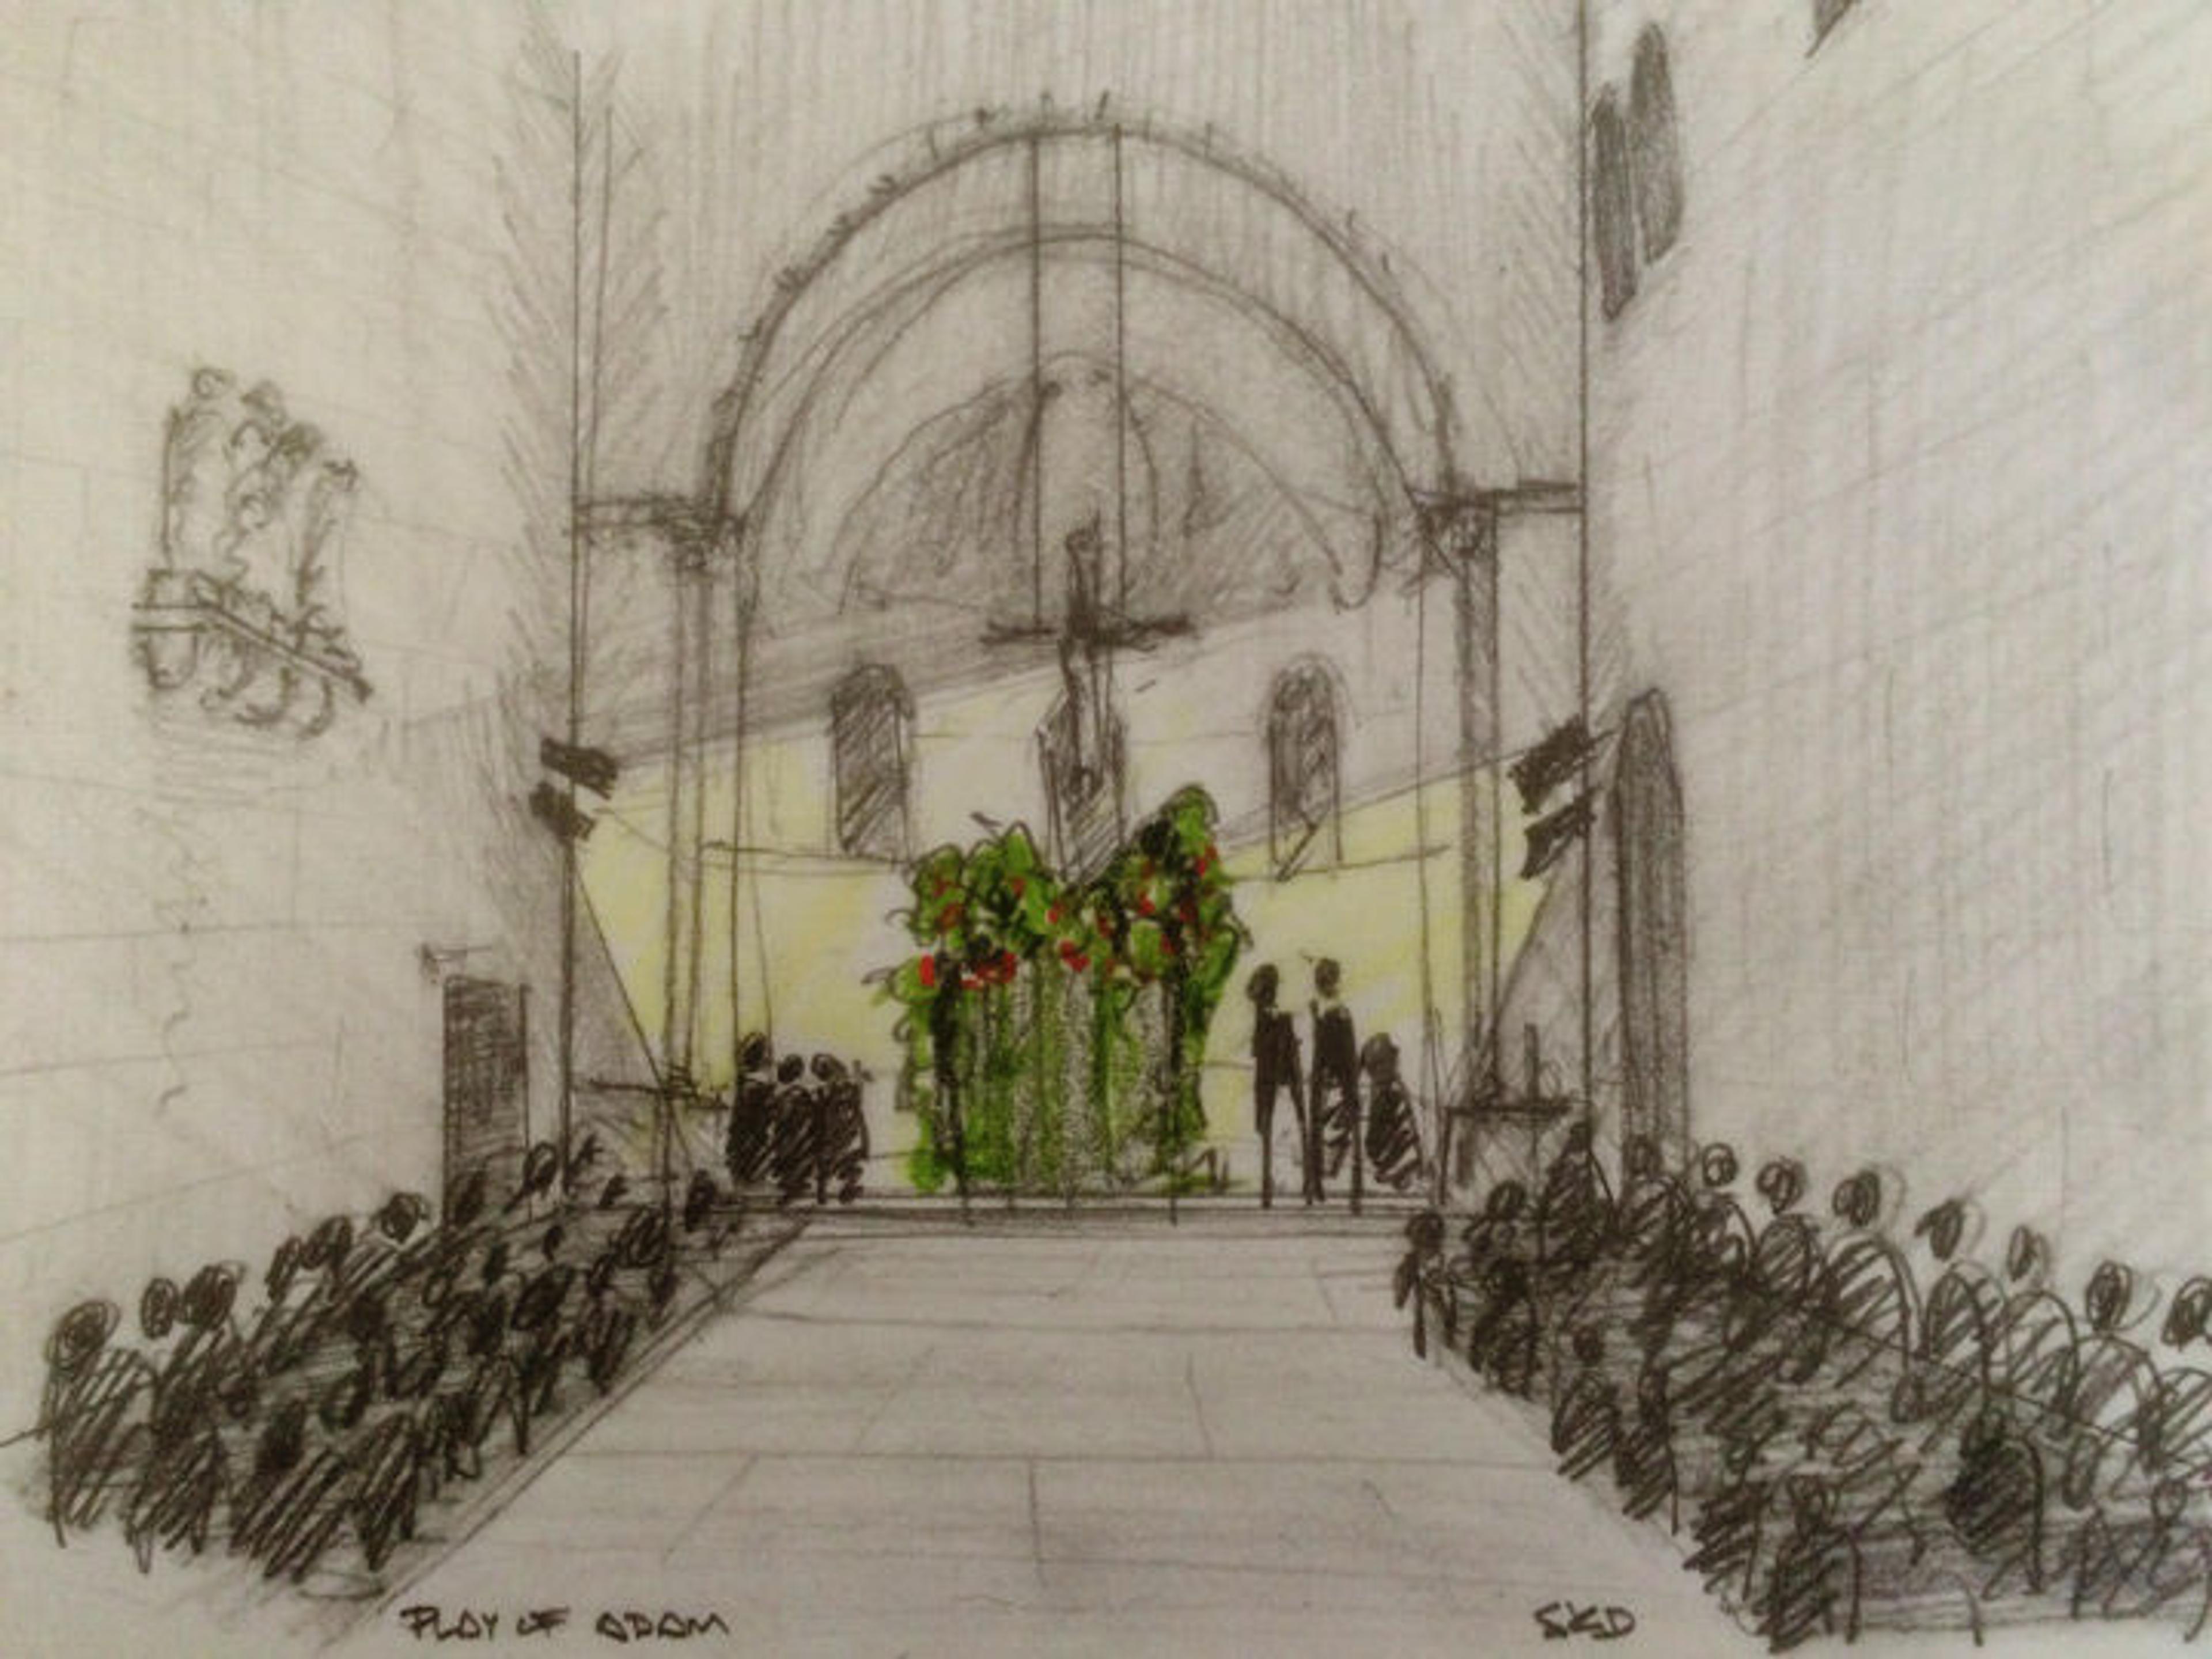 A hand-drawn rendering of the set design for "The Play of Adam" at The Met Cloisters